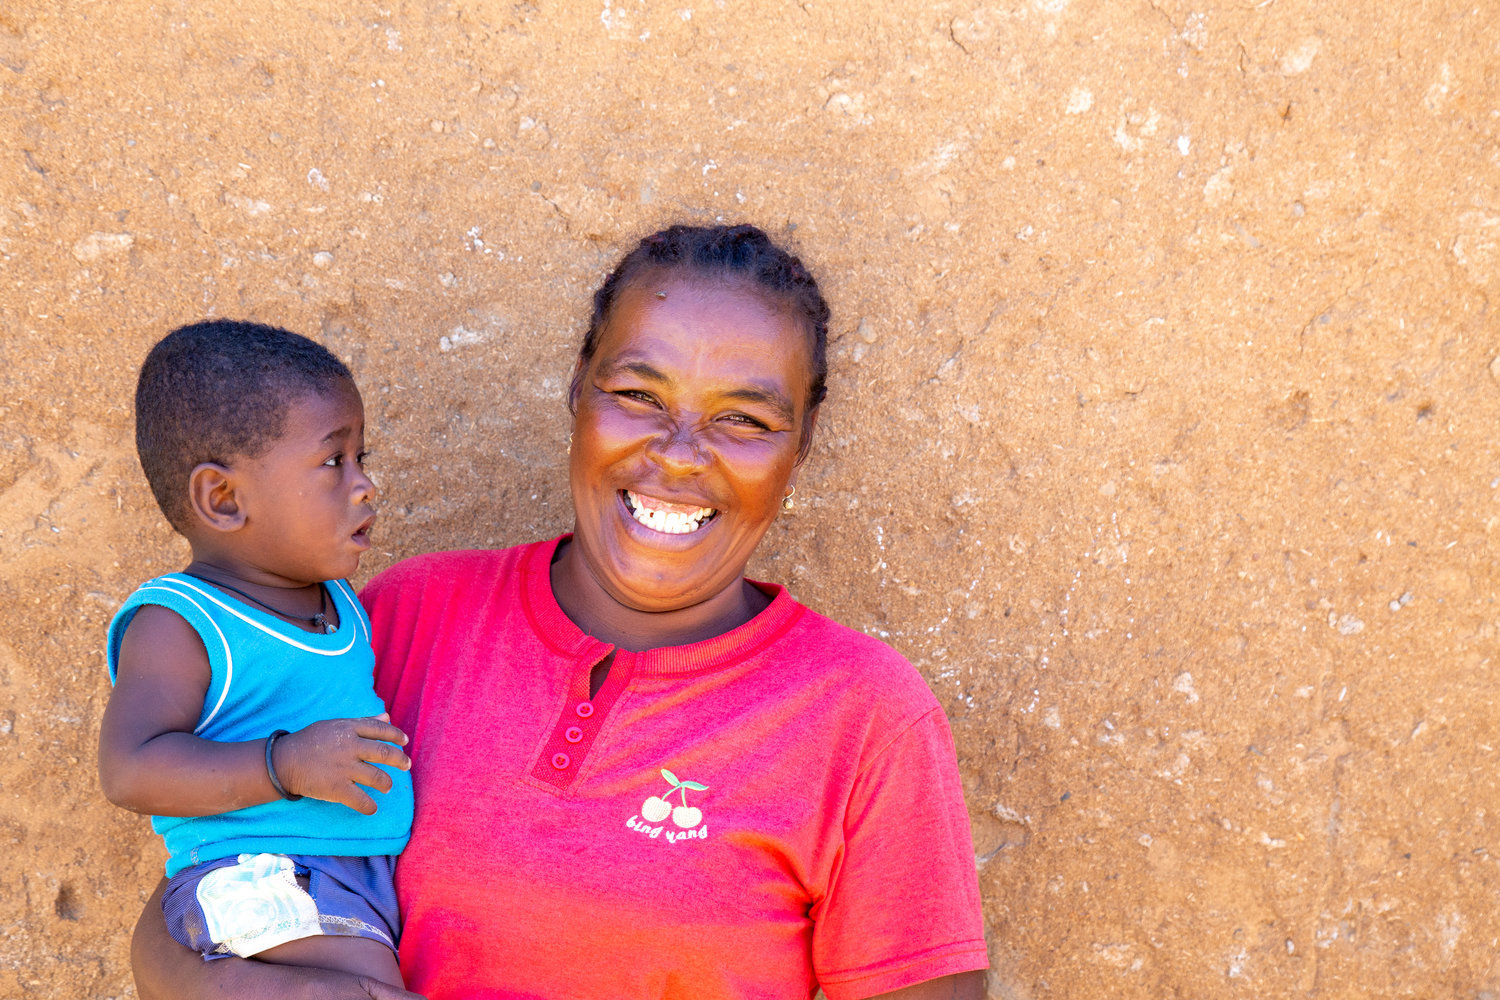 Frankline Fanomezantsoa Rasoanandrasana, 41, lead mother for the CLTN (Community-Led Total Nutrition) project, and her son Thorin, 11 months, by their home in Miary Ankoranga village, Miary commune, Toliara district, Madagascar.